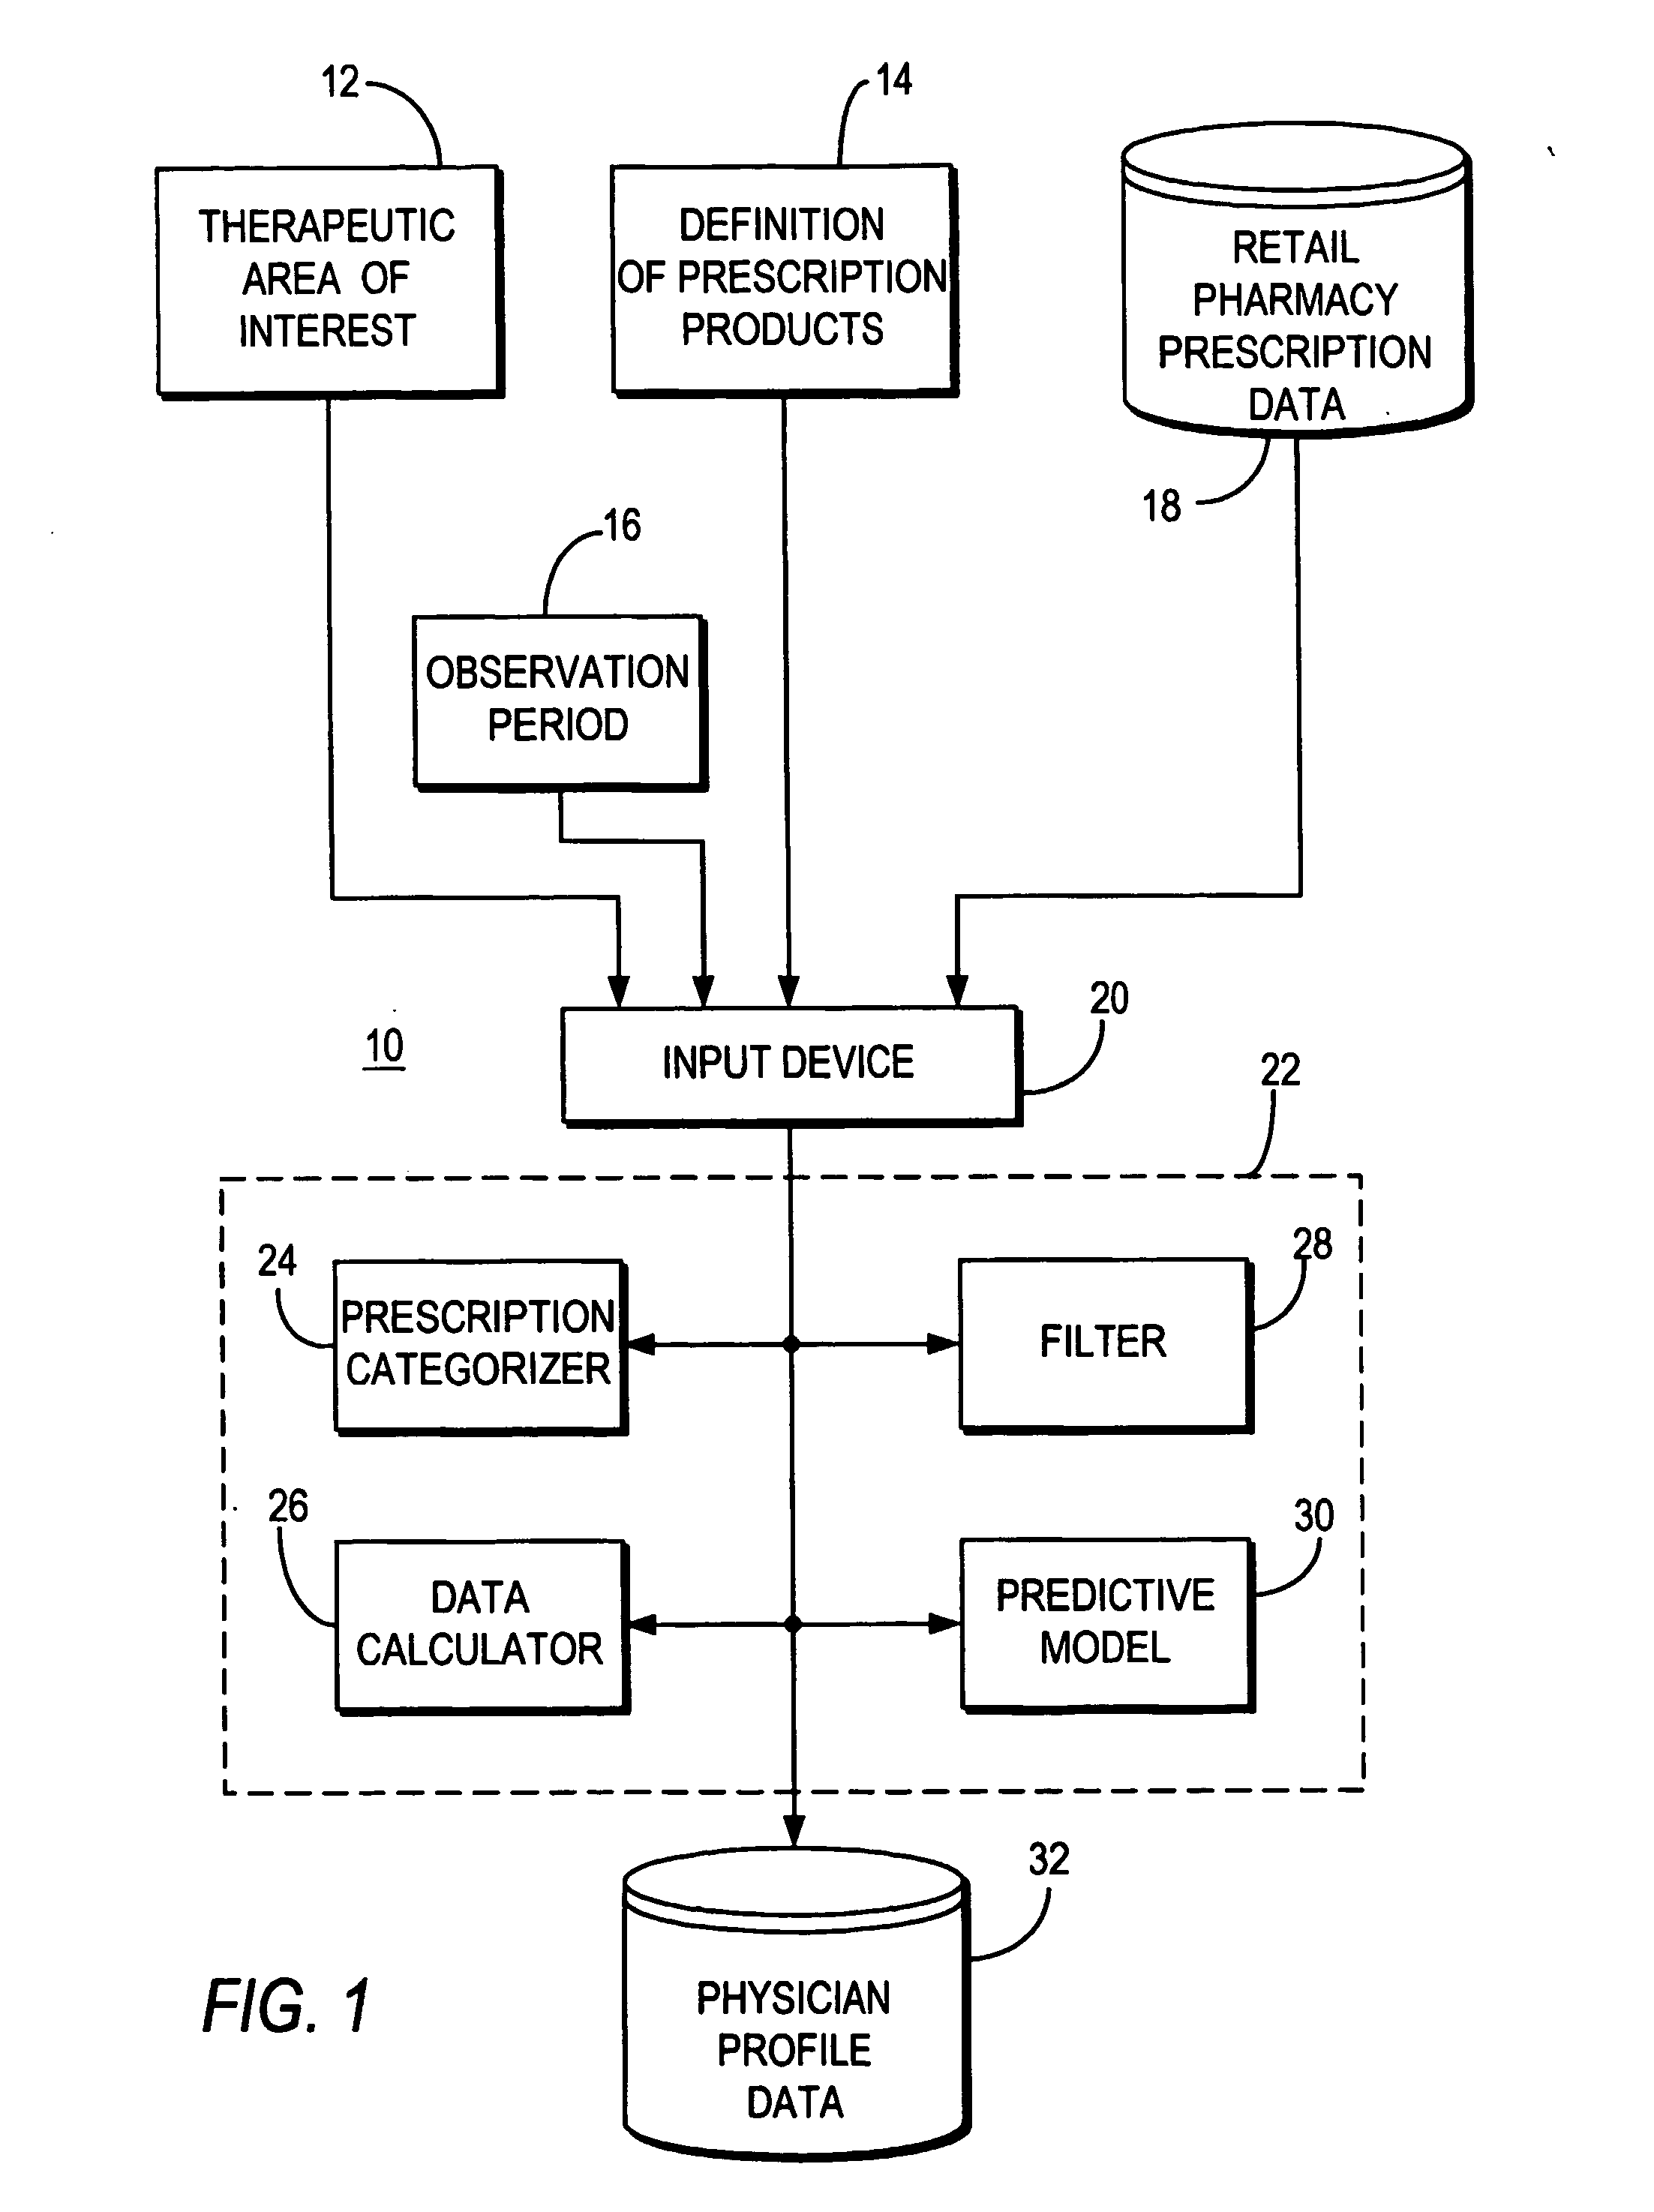 System and methods for generating physician profiles concerning prescription therapy practices with self-adaptive predictive model